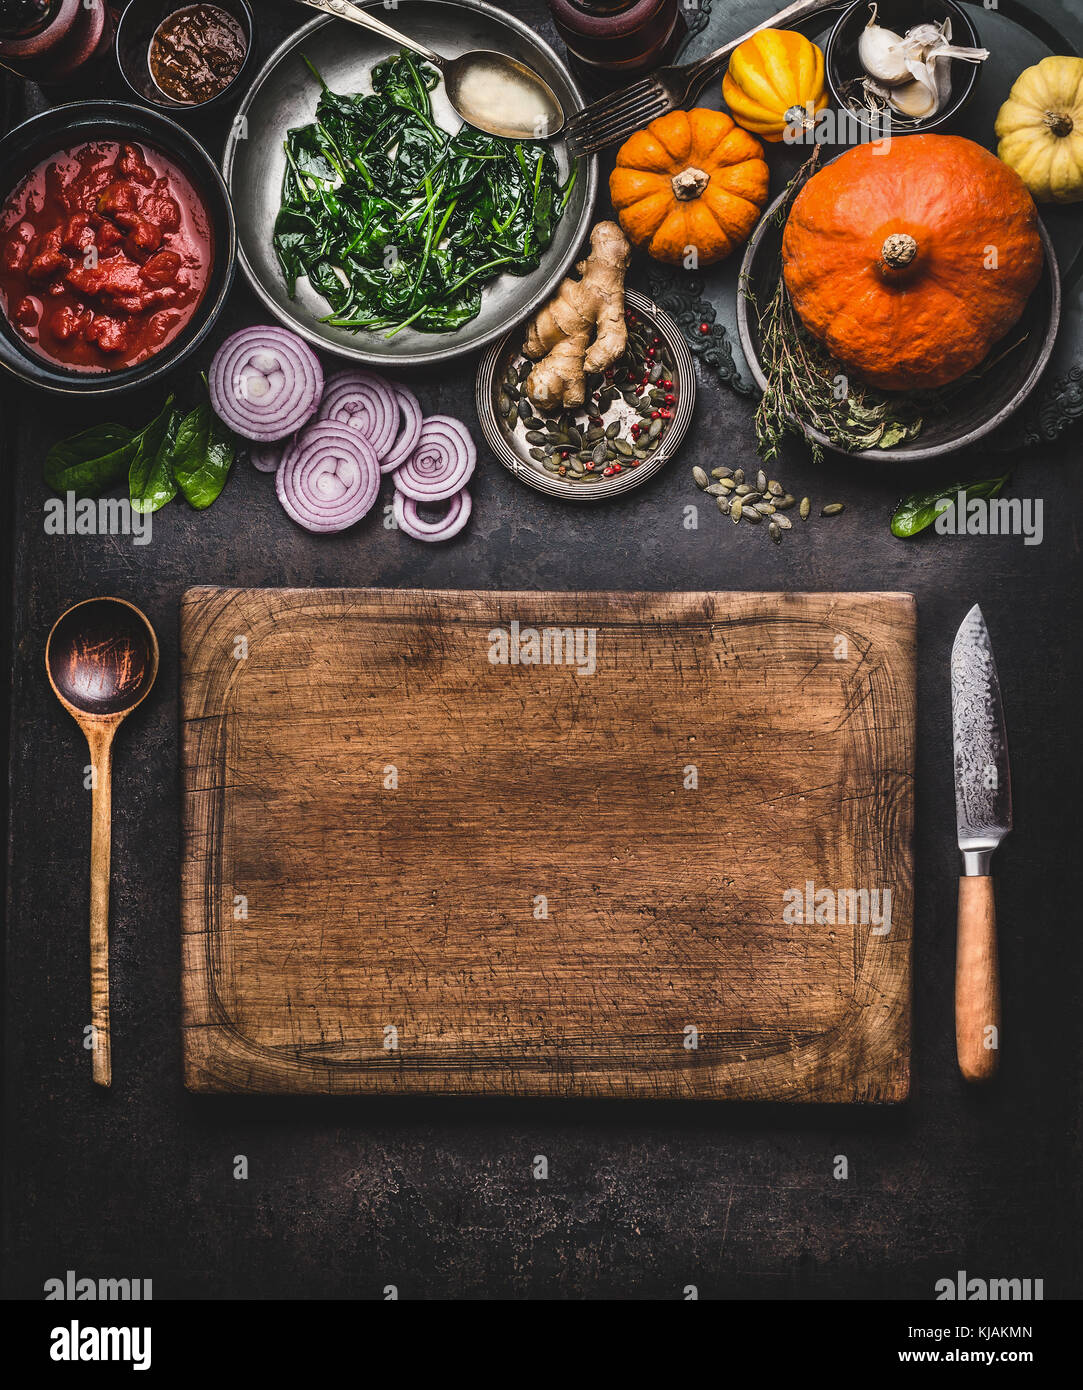 Pumpkin dish cooking. Food background with wooden cutting board, kitchen knife and spoon. Various vegetarian seasonal ingredients for tasty meal Stock Photo